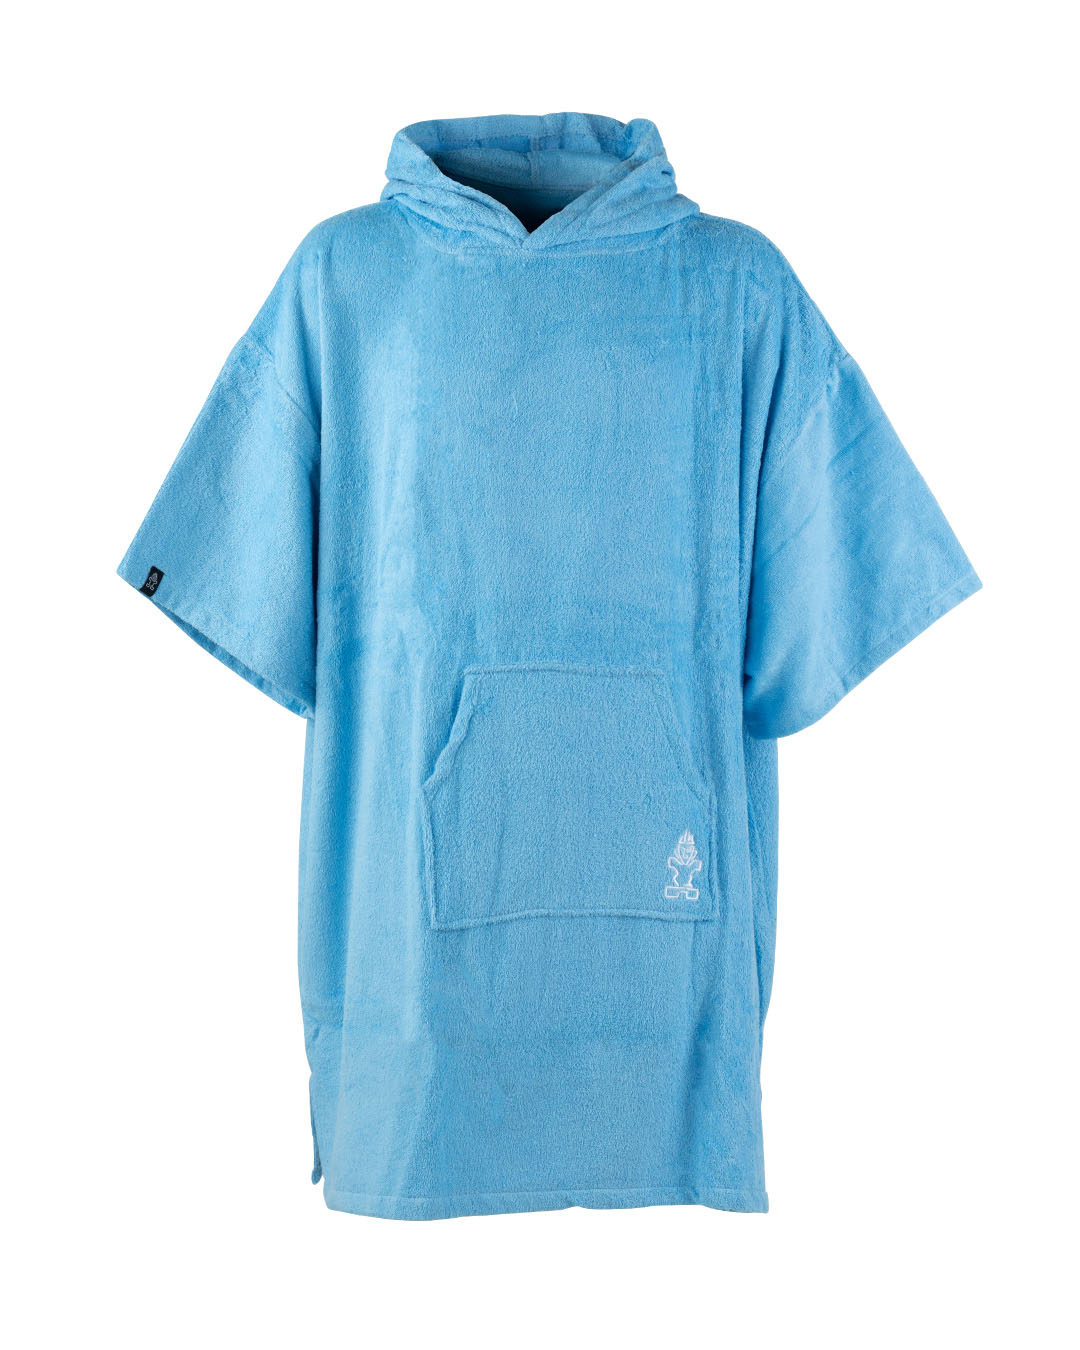 STARBOARD PONCHO TOWEL